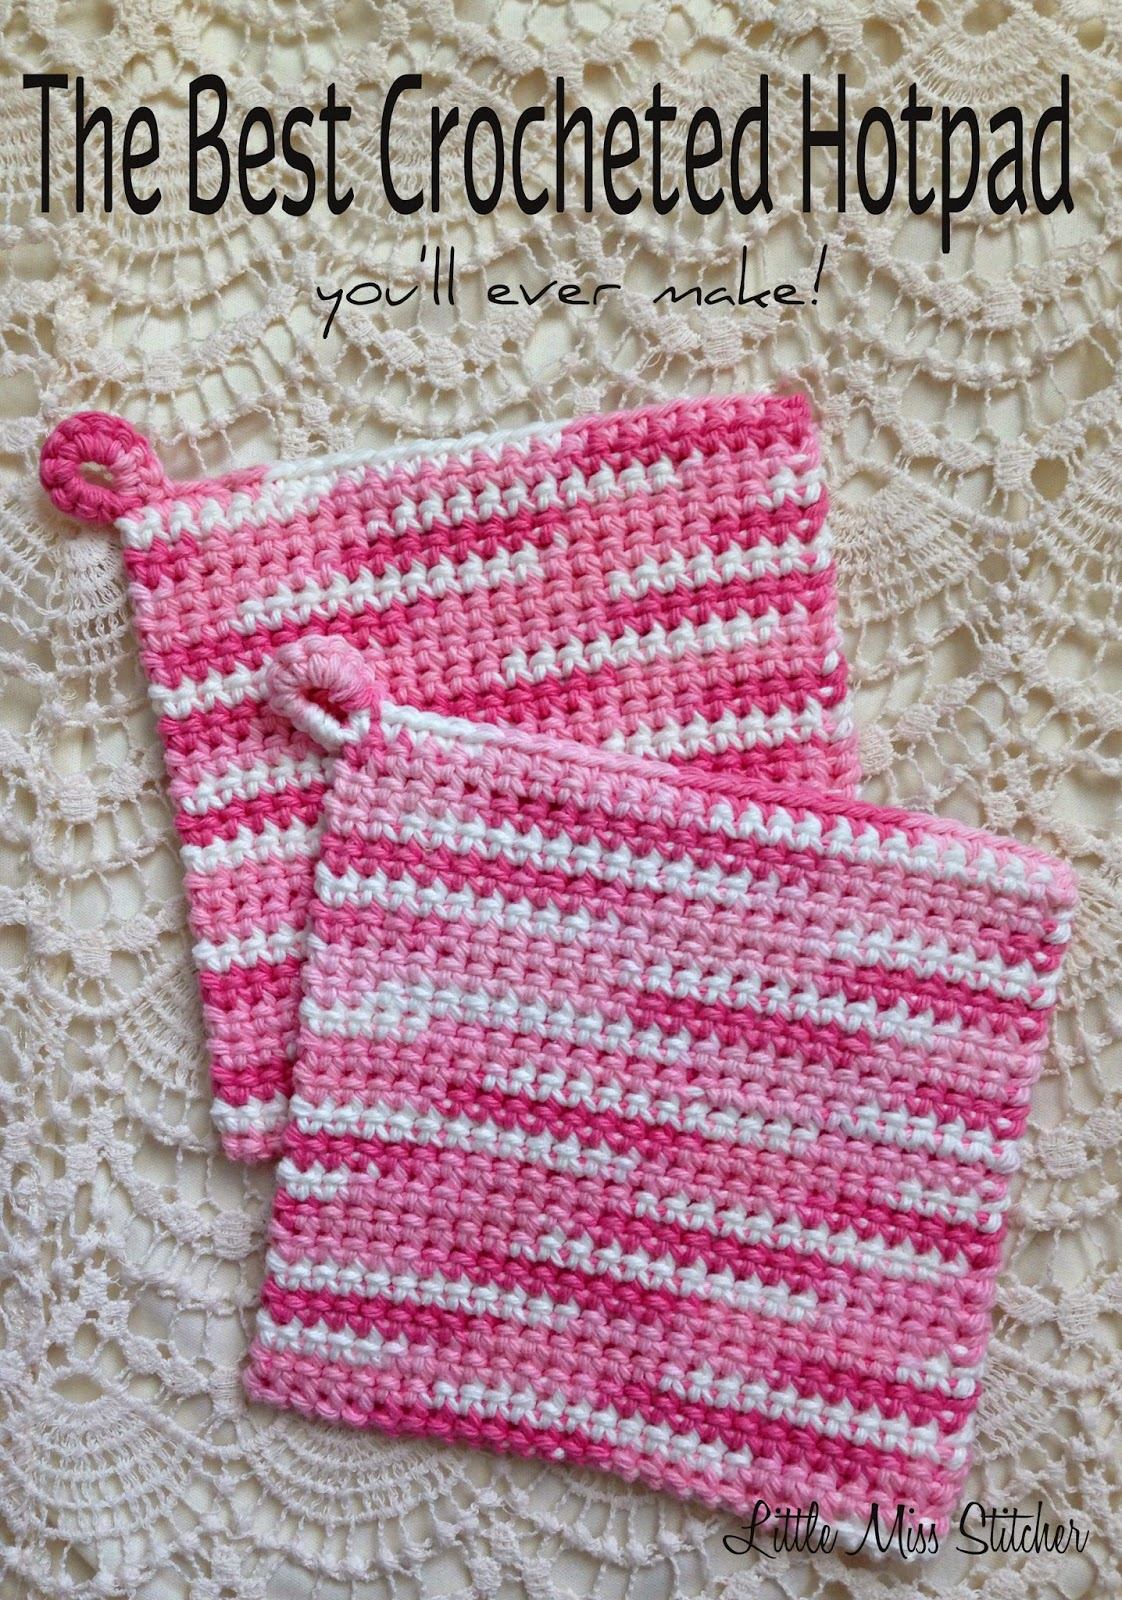 Free Crochet Hot Pad Patterns Little Miss Stitcher The Best Crocheted Hotpad Youll Ever Make